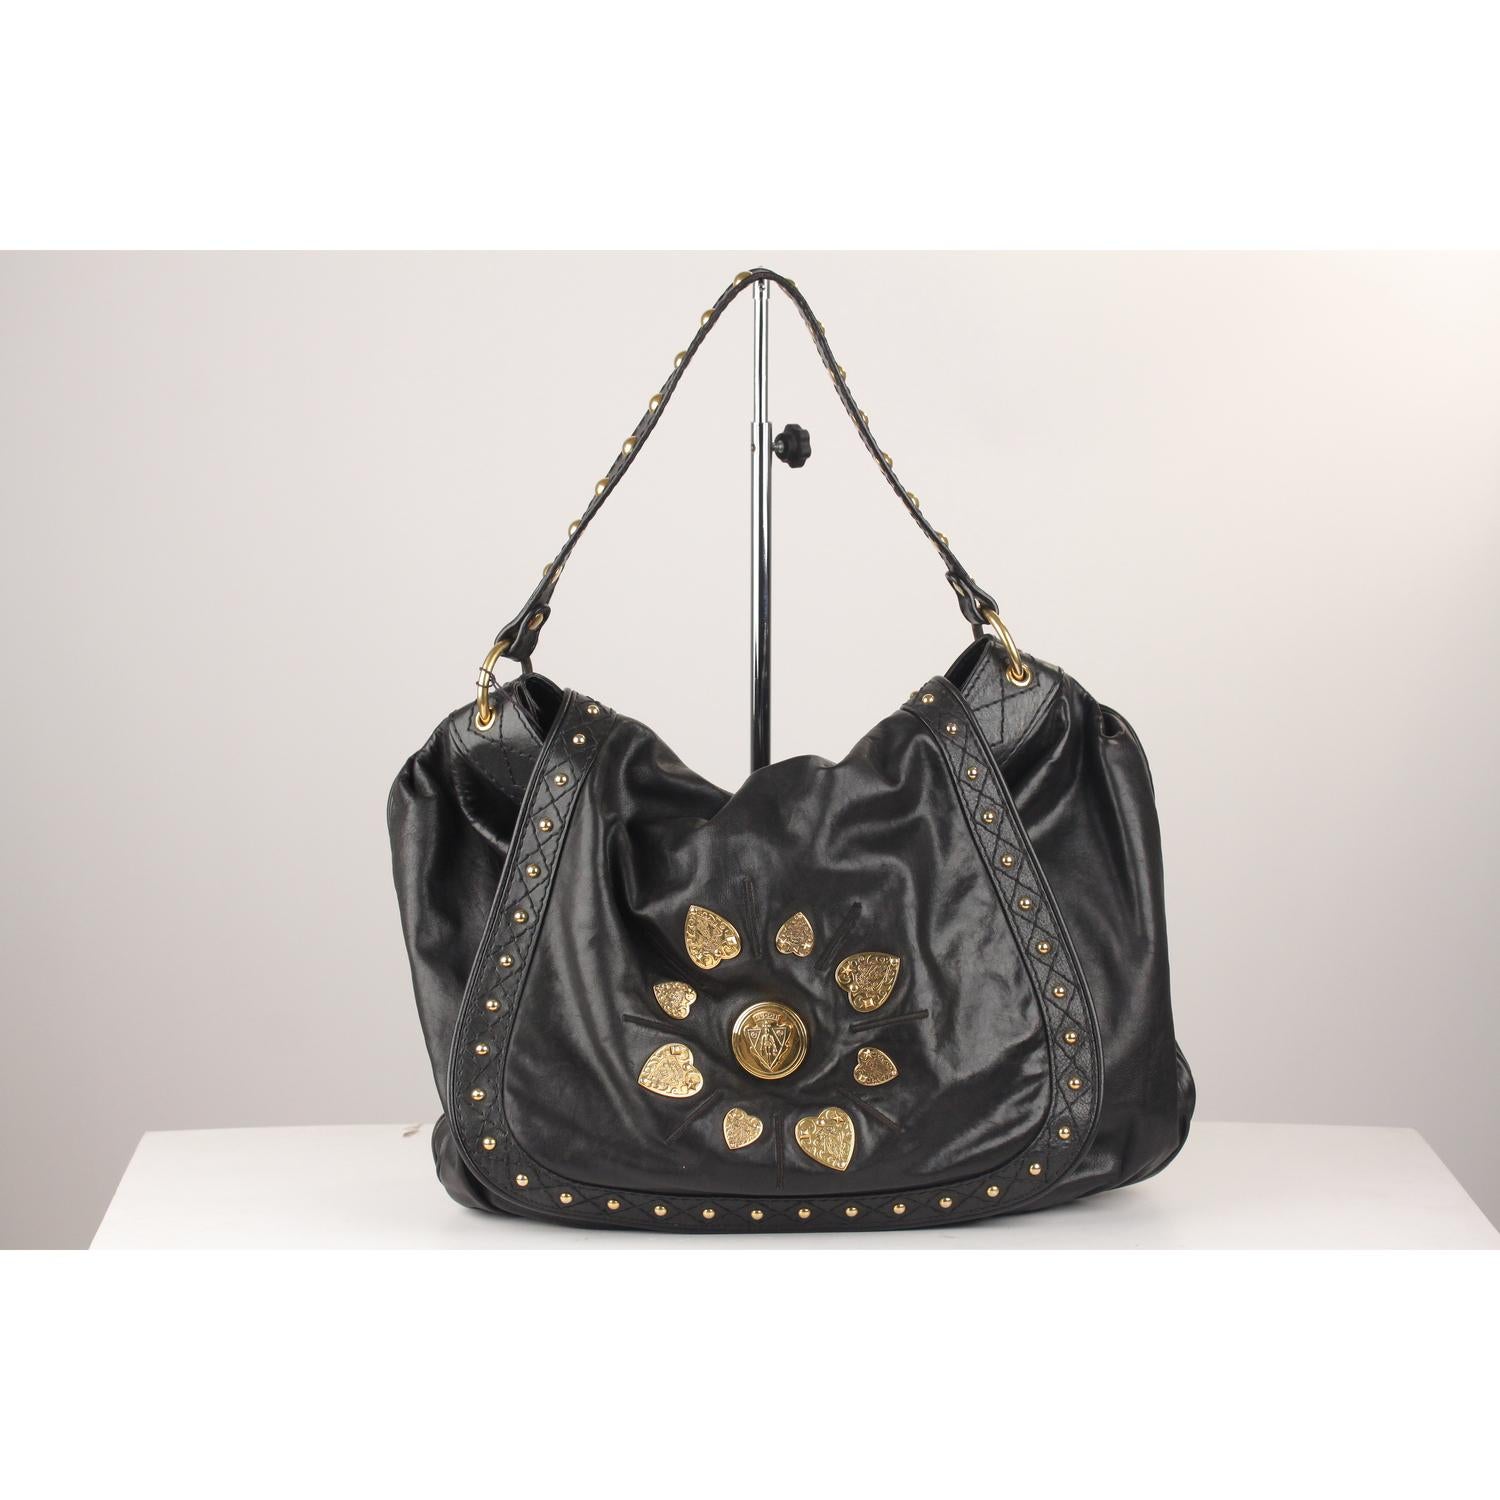 Gucci 'Irina Babouska' Shoulder Bag vrafted from smooth black leather. The bag features Gucci crest medallions on the flap sorrounded by heart-shaped Gucci crests. Studs detailing on the flap and on shoulder strap. Flap closure. Black Gucci fabric